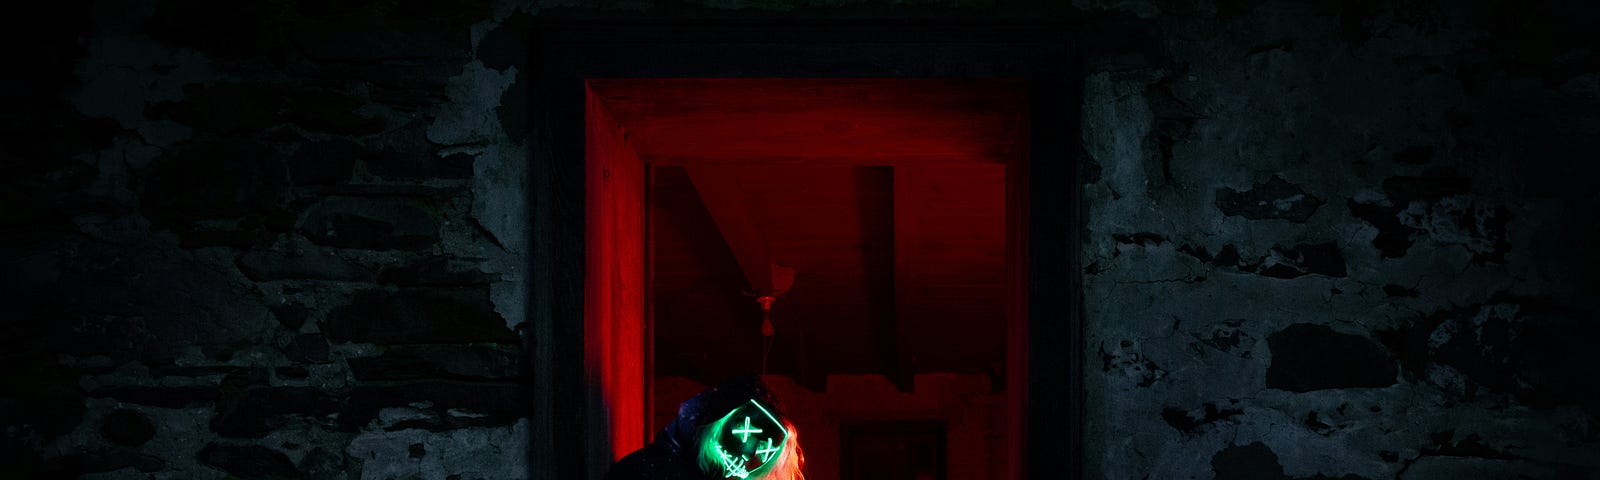 A green-masked man blocks the entrance of a red-lit room in a dramatic dark grey atmosphere.